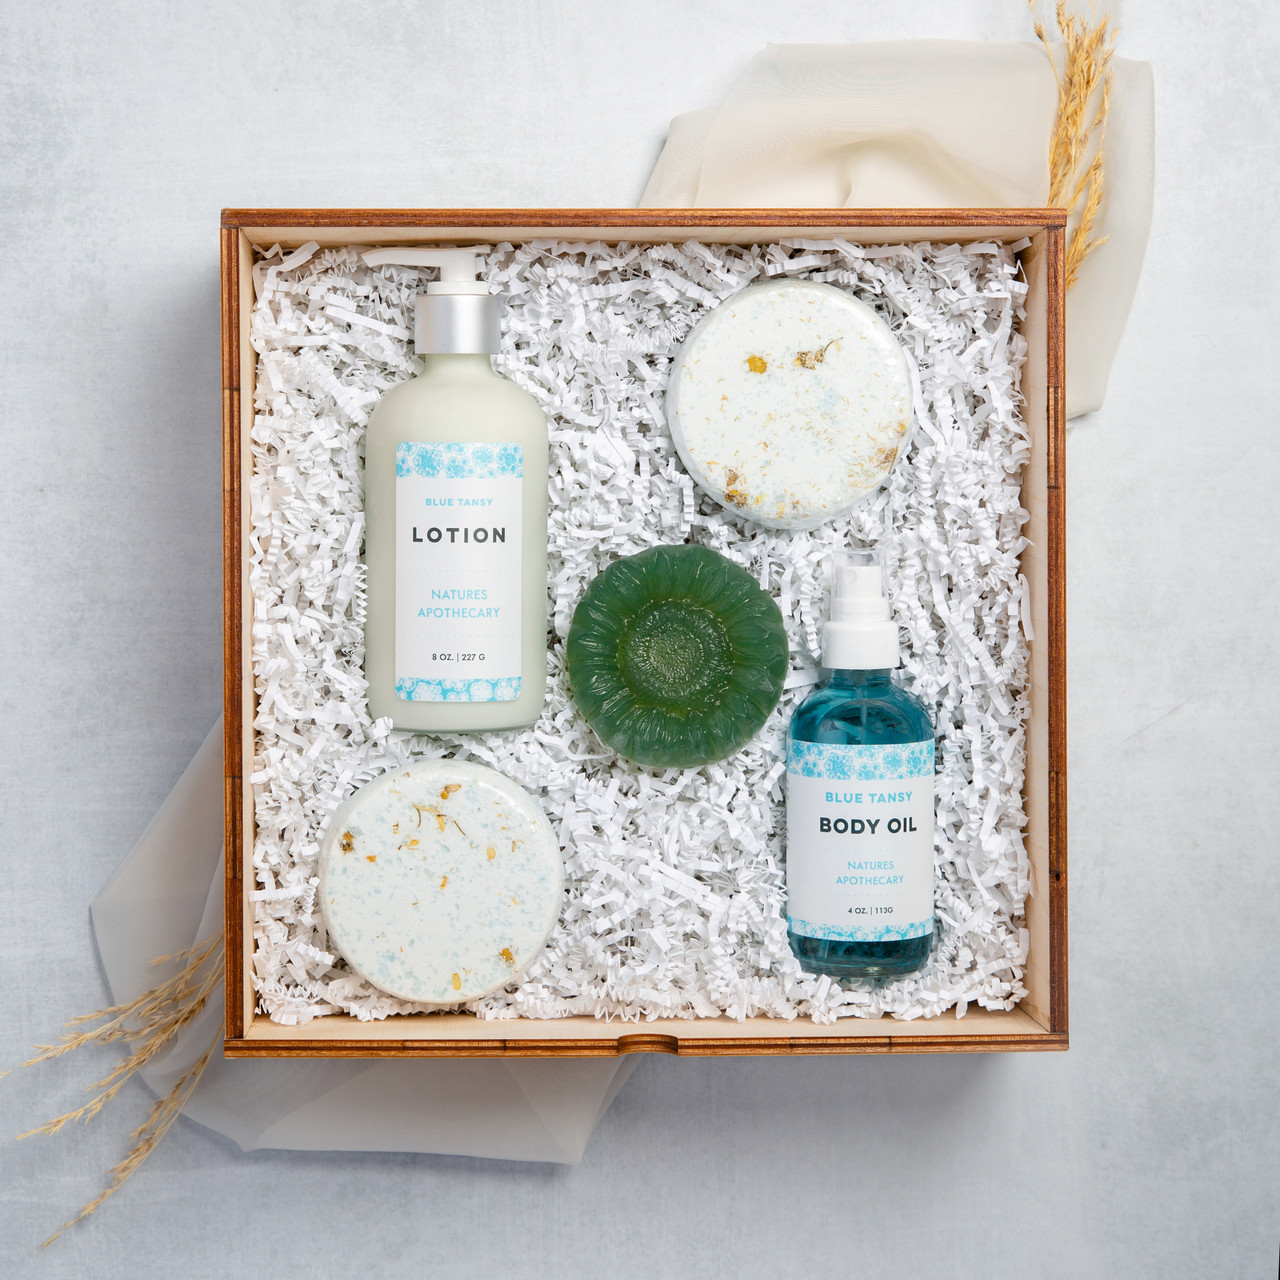 Blue Tansy -  The Gift of Luxury - Perfect House Warming Gift - Curated Gifts By DAYSPA Body Basicsdy Basics Gift Box Made in USA